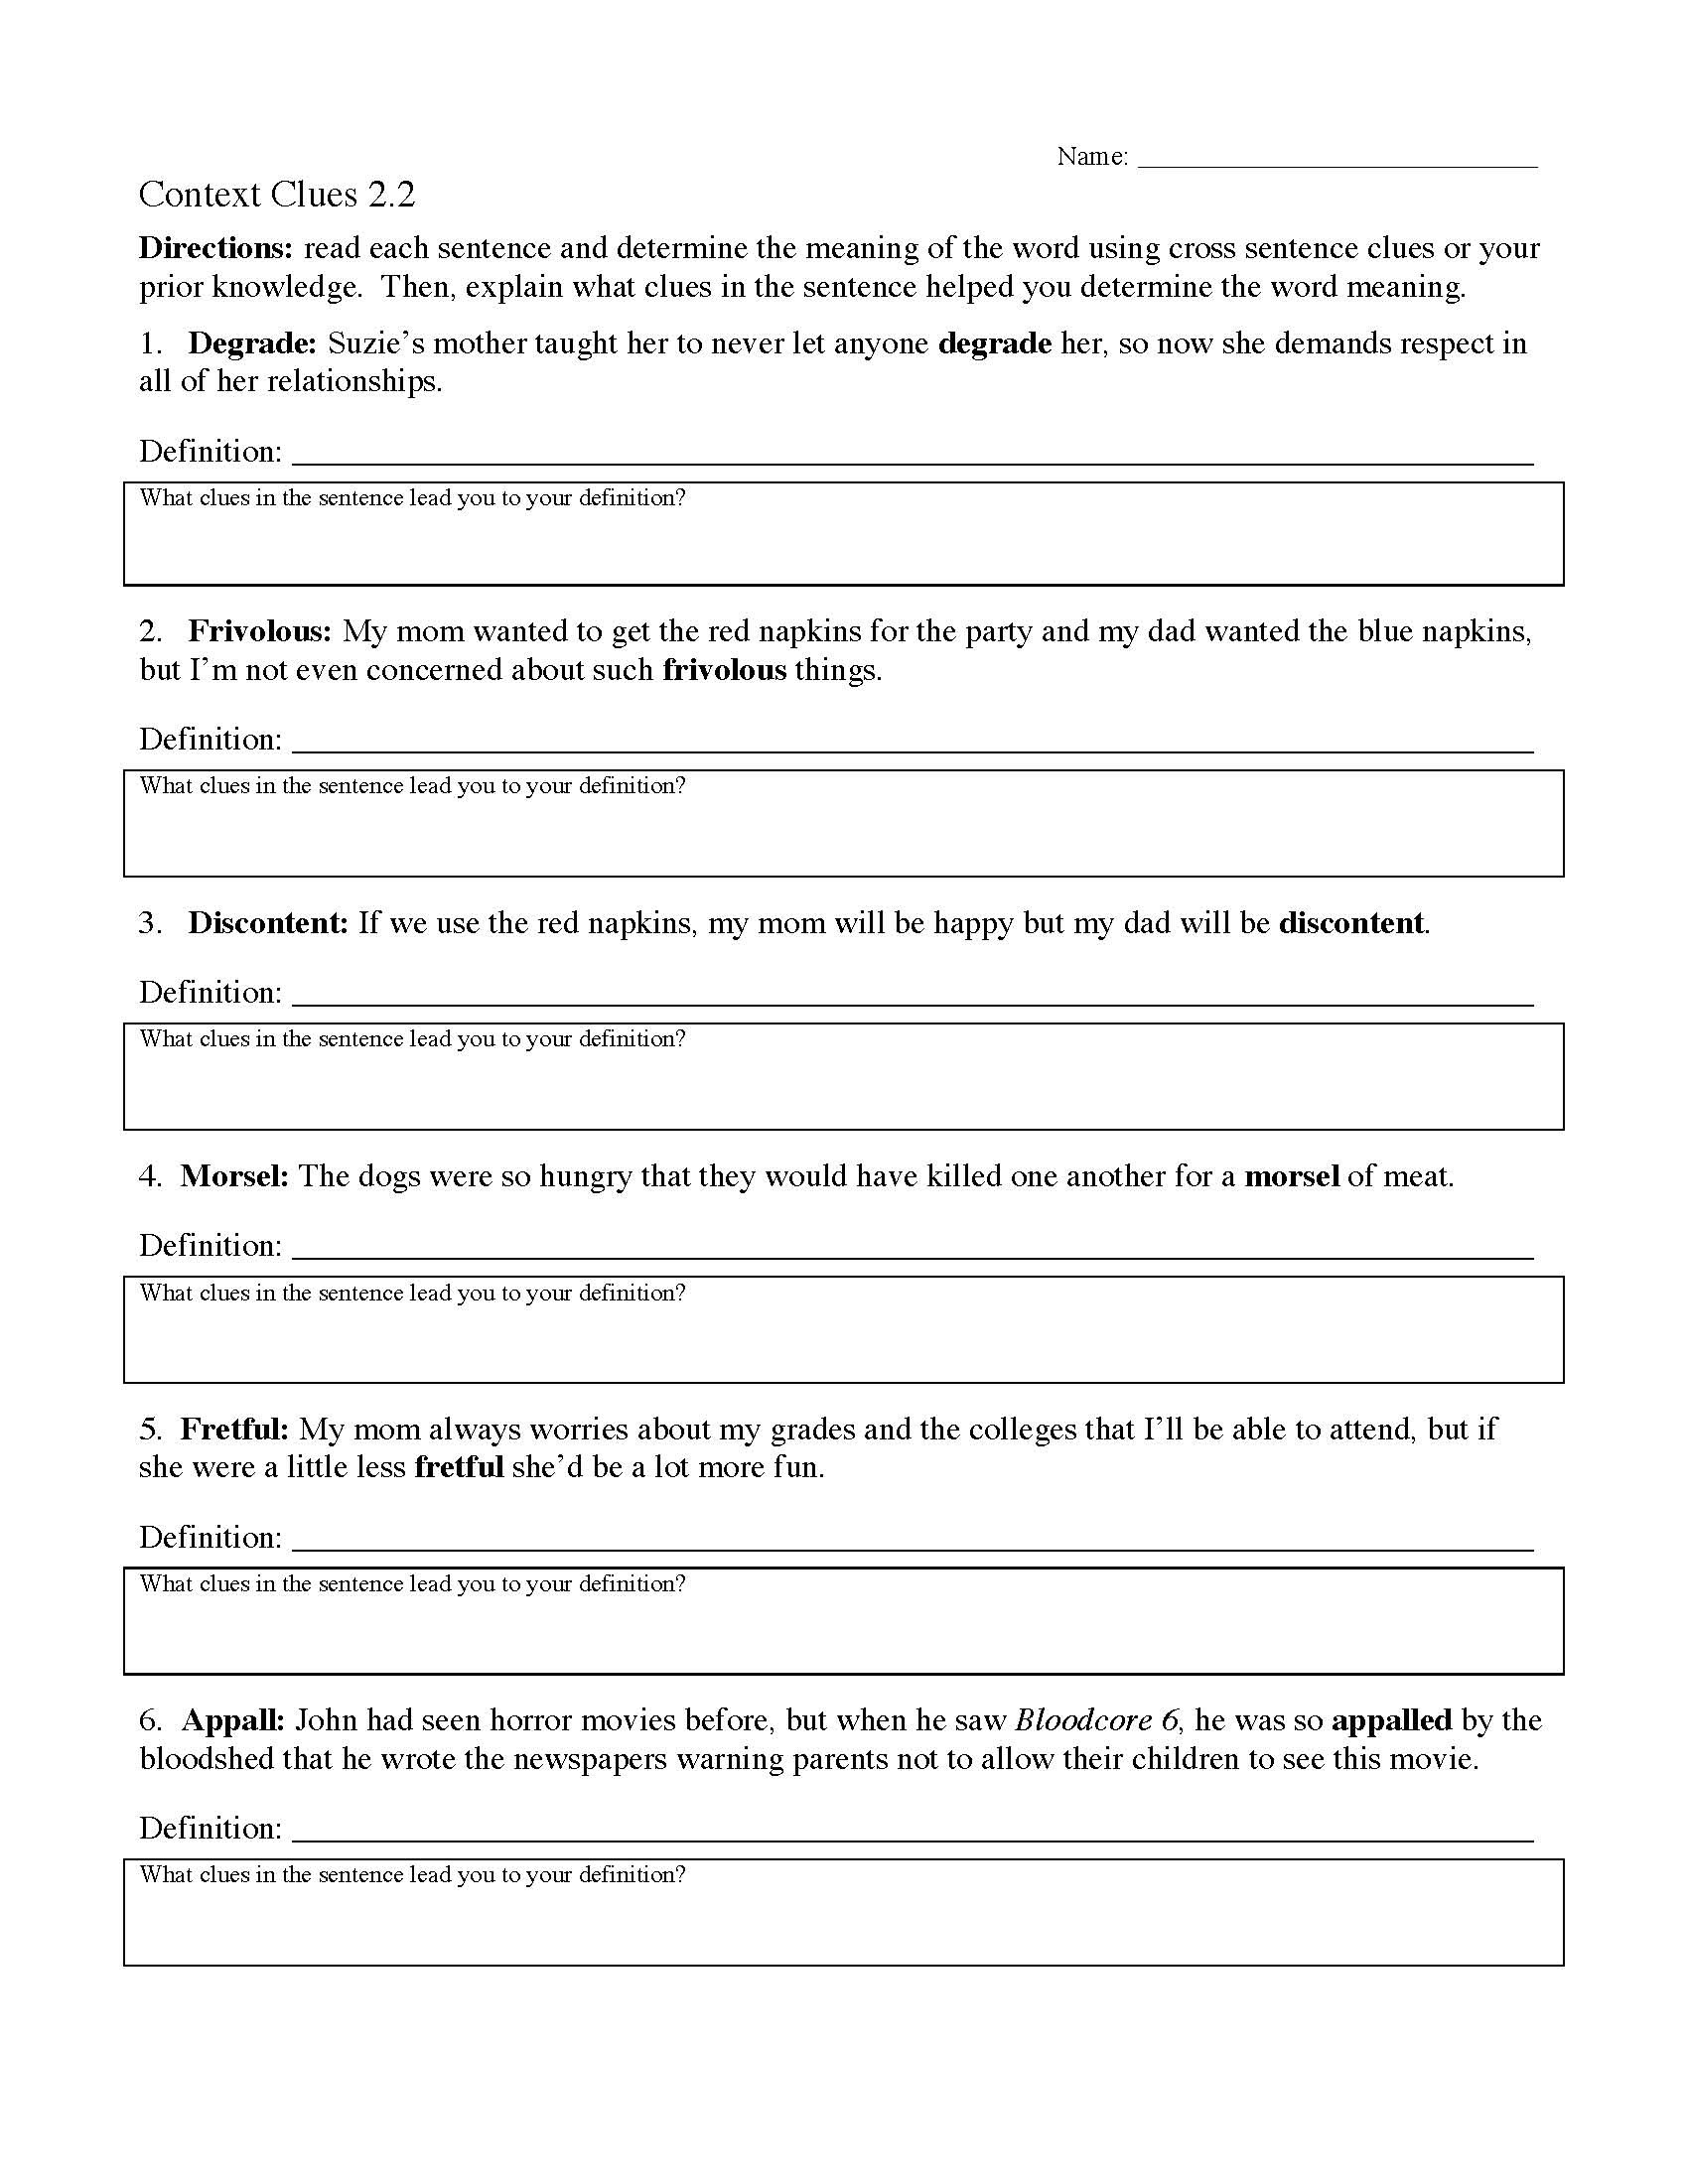 Cross Section Worksheet 7th Grade Context Clues Worksheets